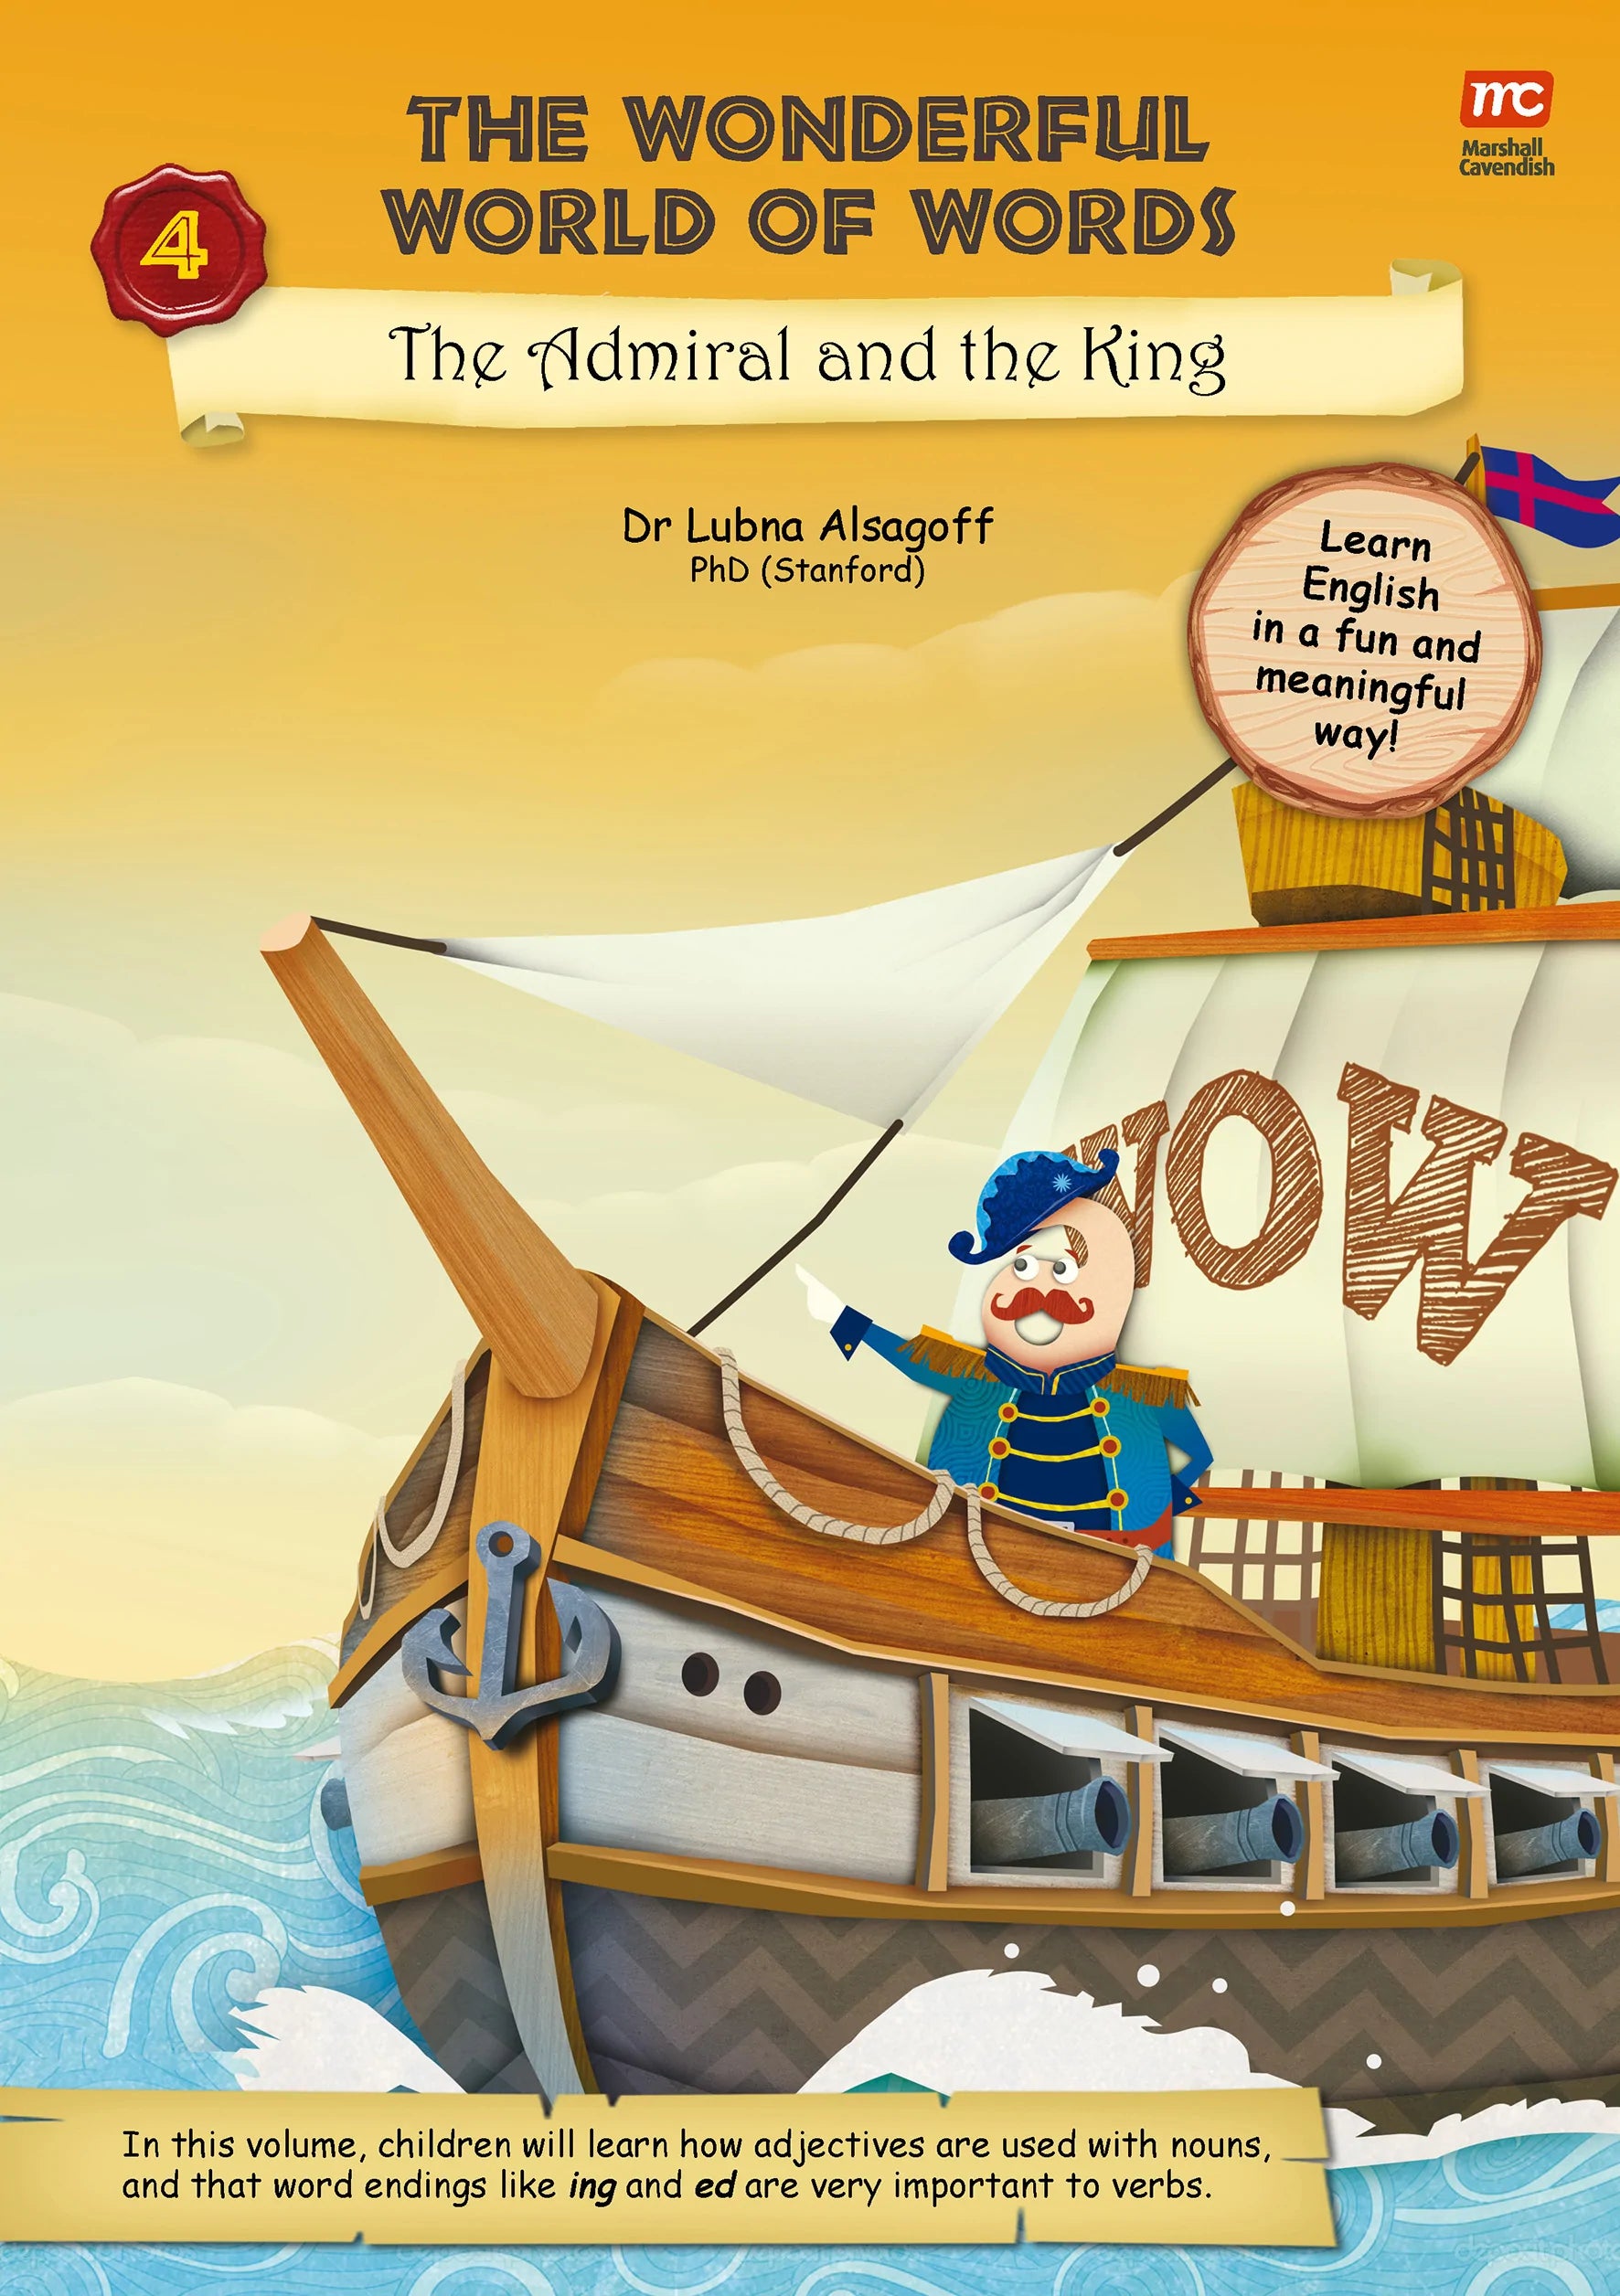 The Wonderful World of Words Volume 4: The Admiral and the King